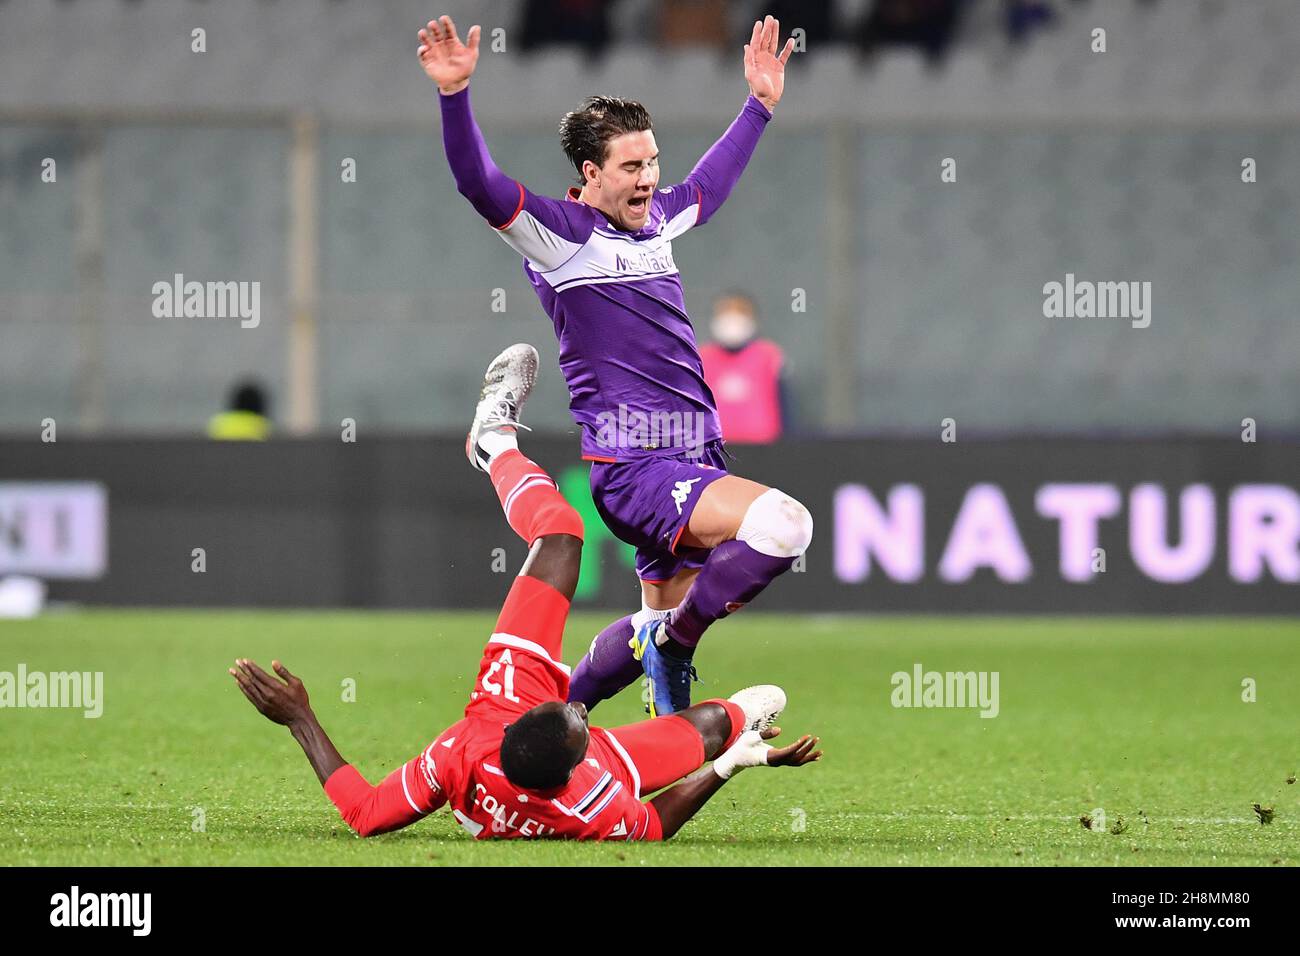 Florenz, Italien. 30th. November 2021. Omar Colley (Sampdoria) fouls Dusan Vlahovic (Fiorentina) during ACF Fiorentina vs UC Sampdoria, ital Soccer Serie A match in Florence, Italy, November 30 2021 Credit: Independent Photo Agency/Alamy Live News Stockfoto